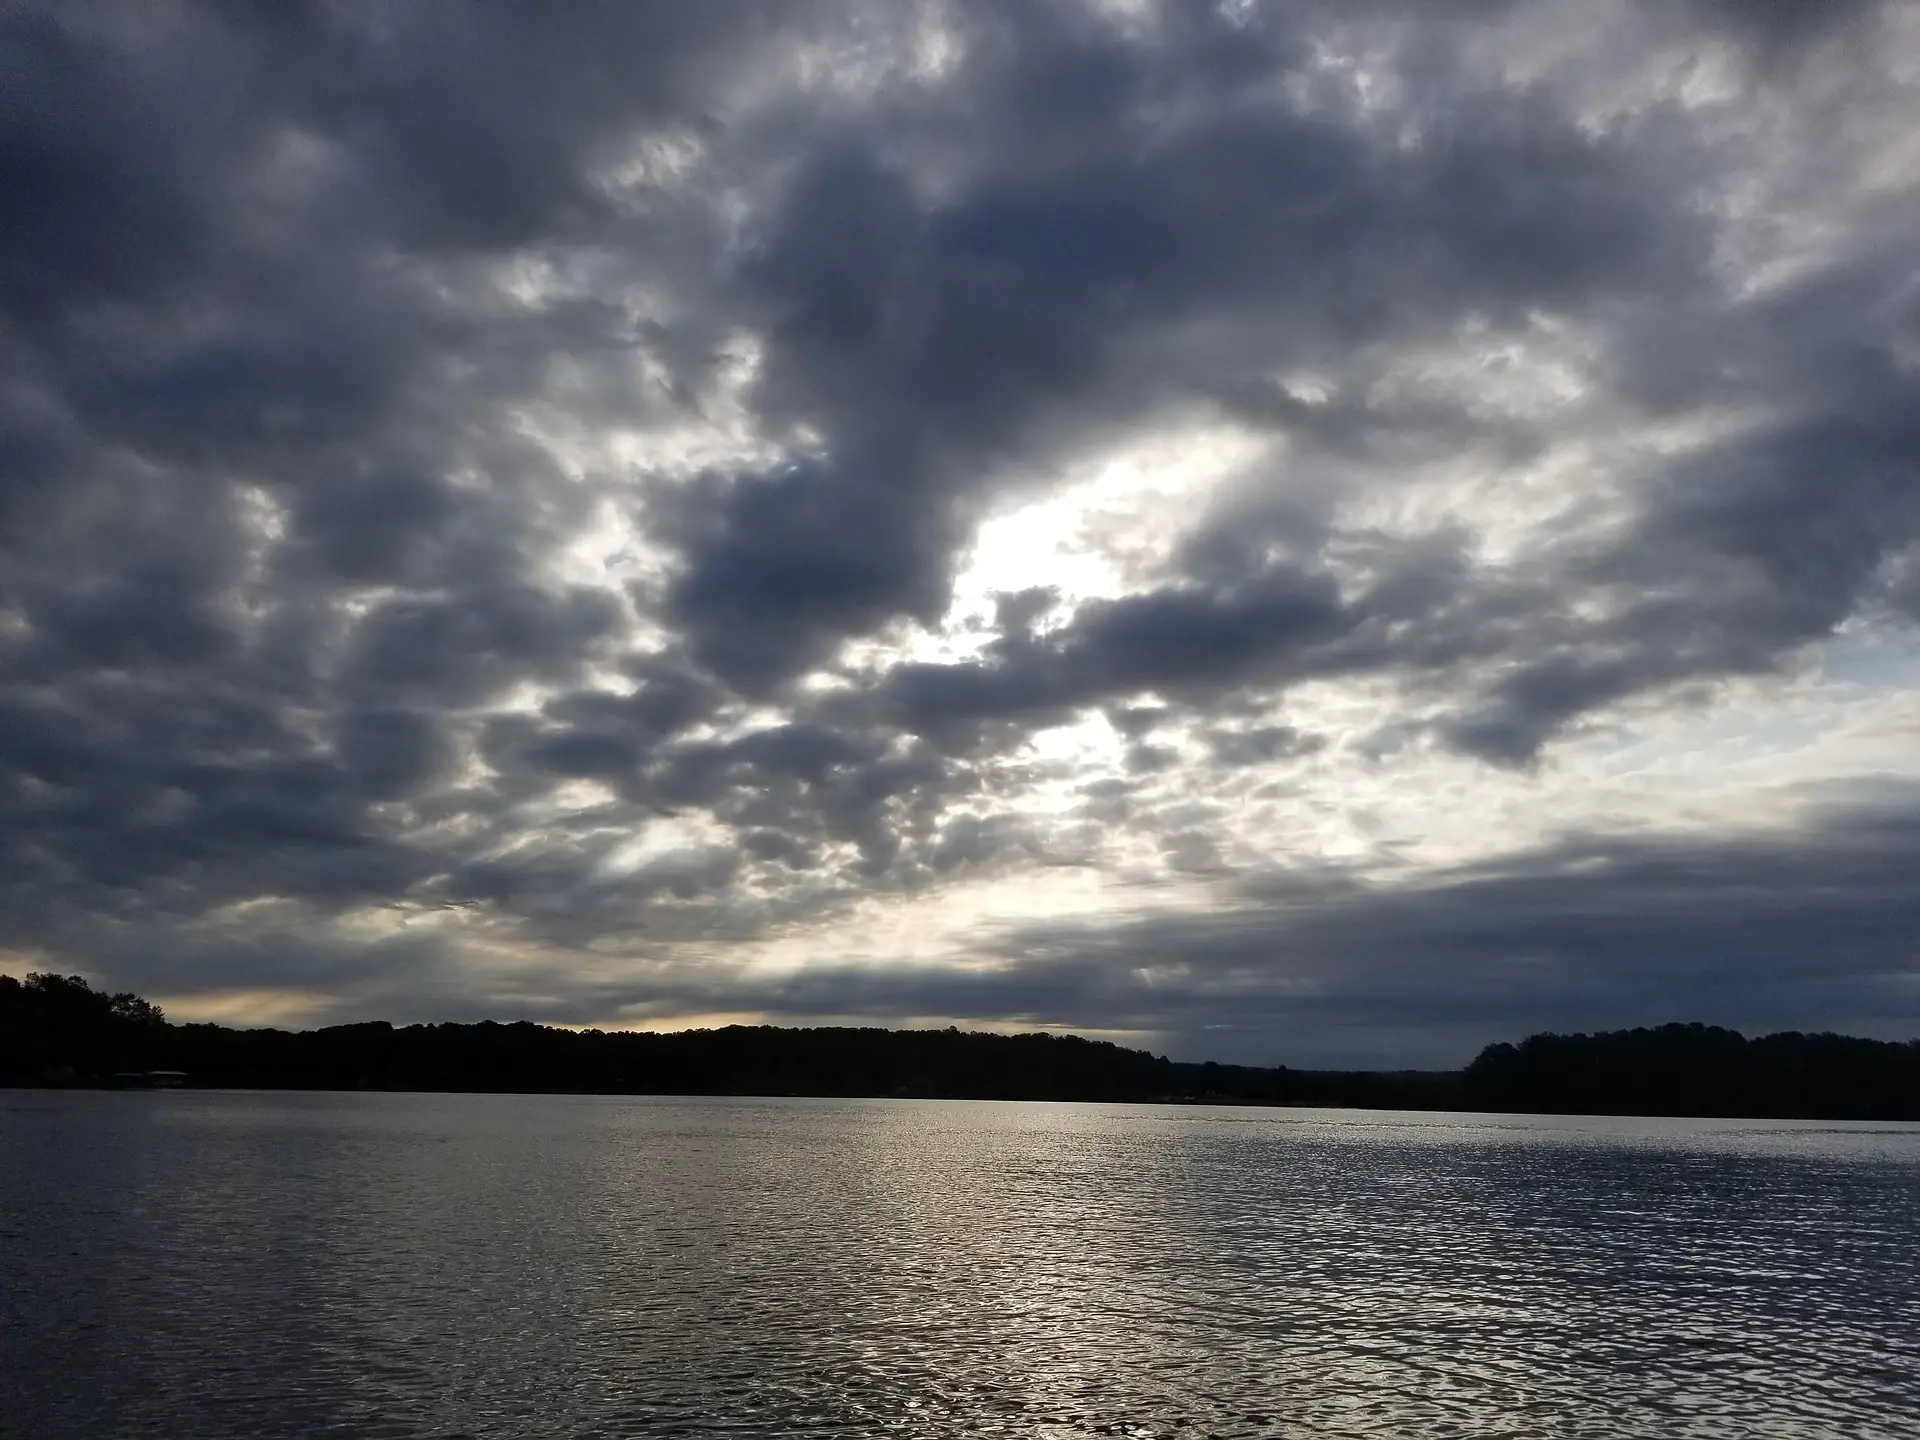 A lake covered with cloudy skies at sunset